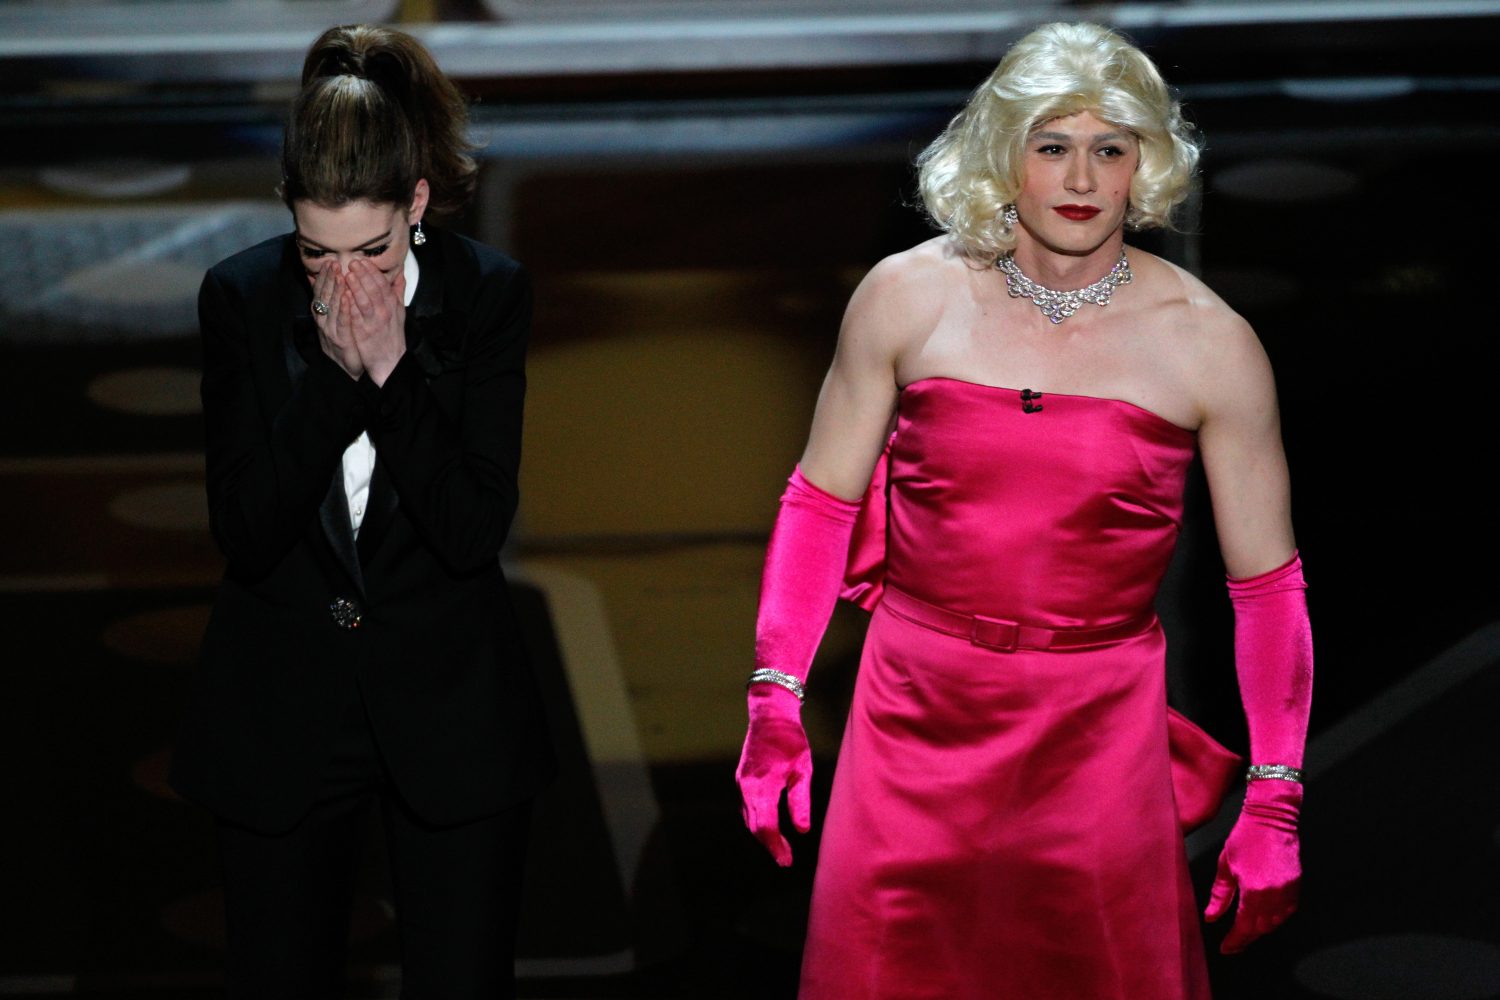 Co-hosts Anne Hathaway, left, and James Franco perform a number during the 83rd Annual Academy Awards at the Kodak Theatre in Los Angeles, California, on Sunday, Feb. 27. (Robert Gauthier/Los Angeles Times/MCT)